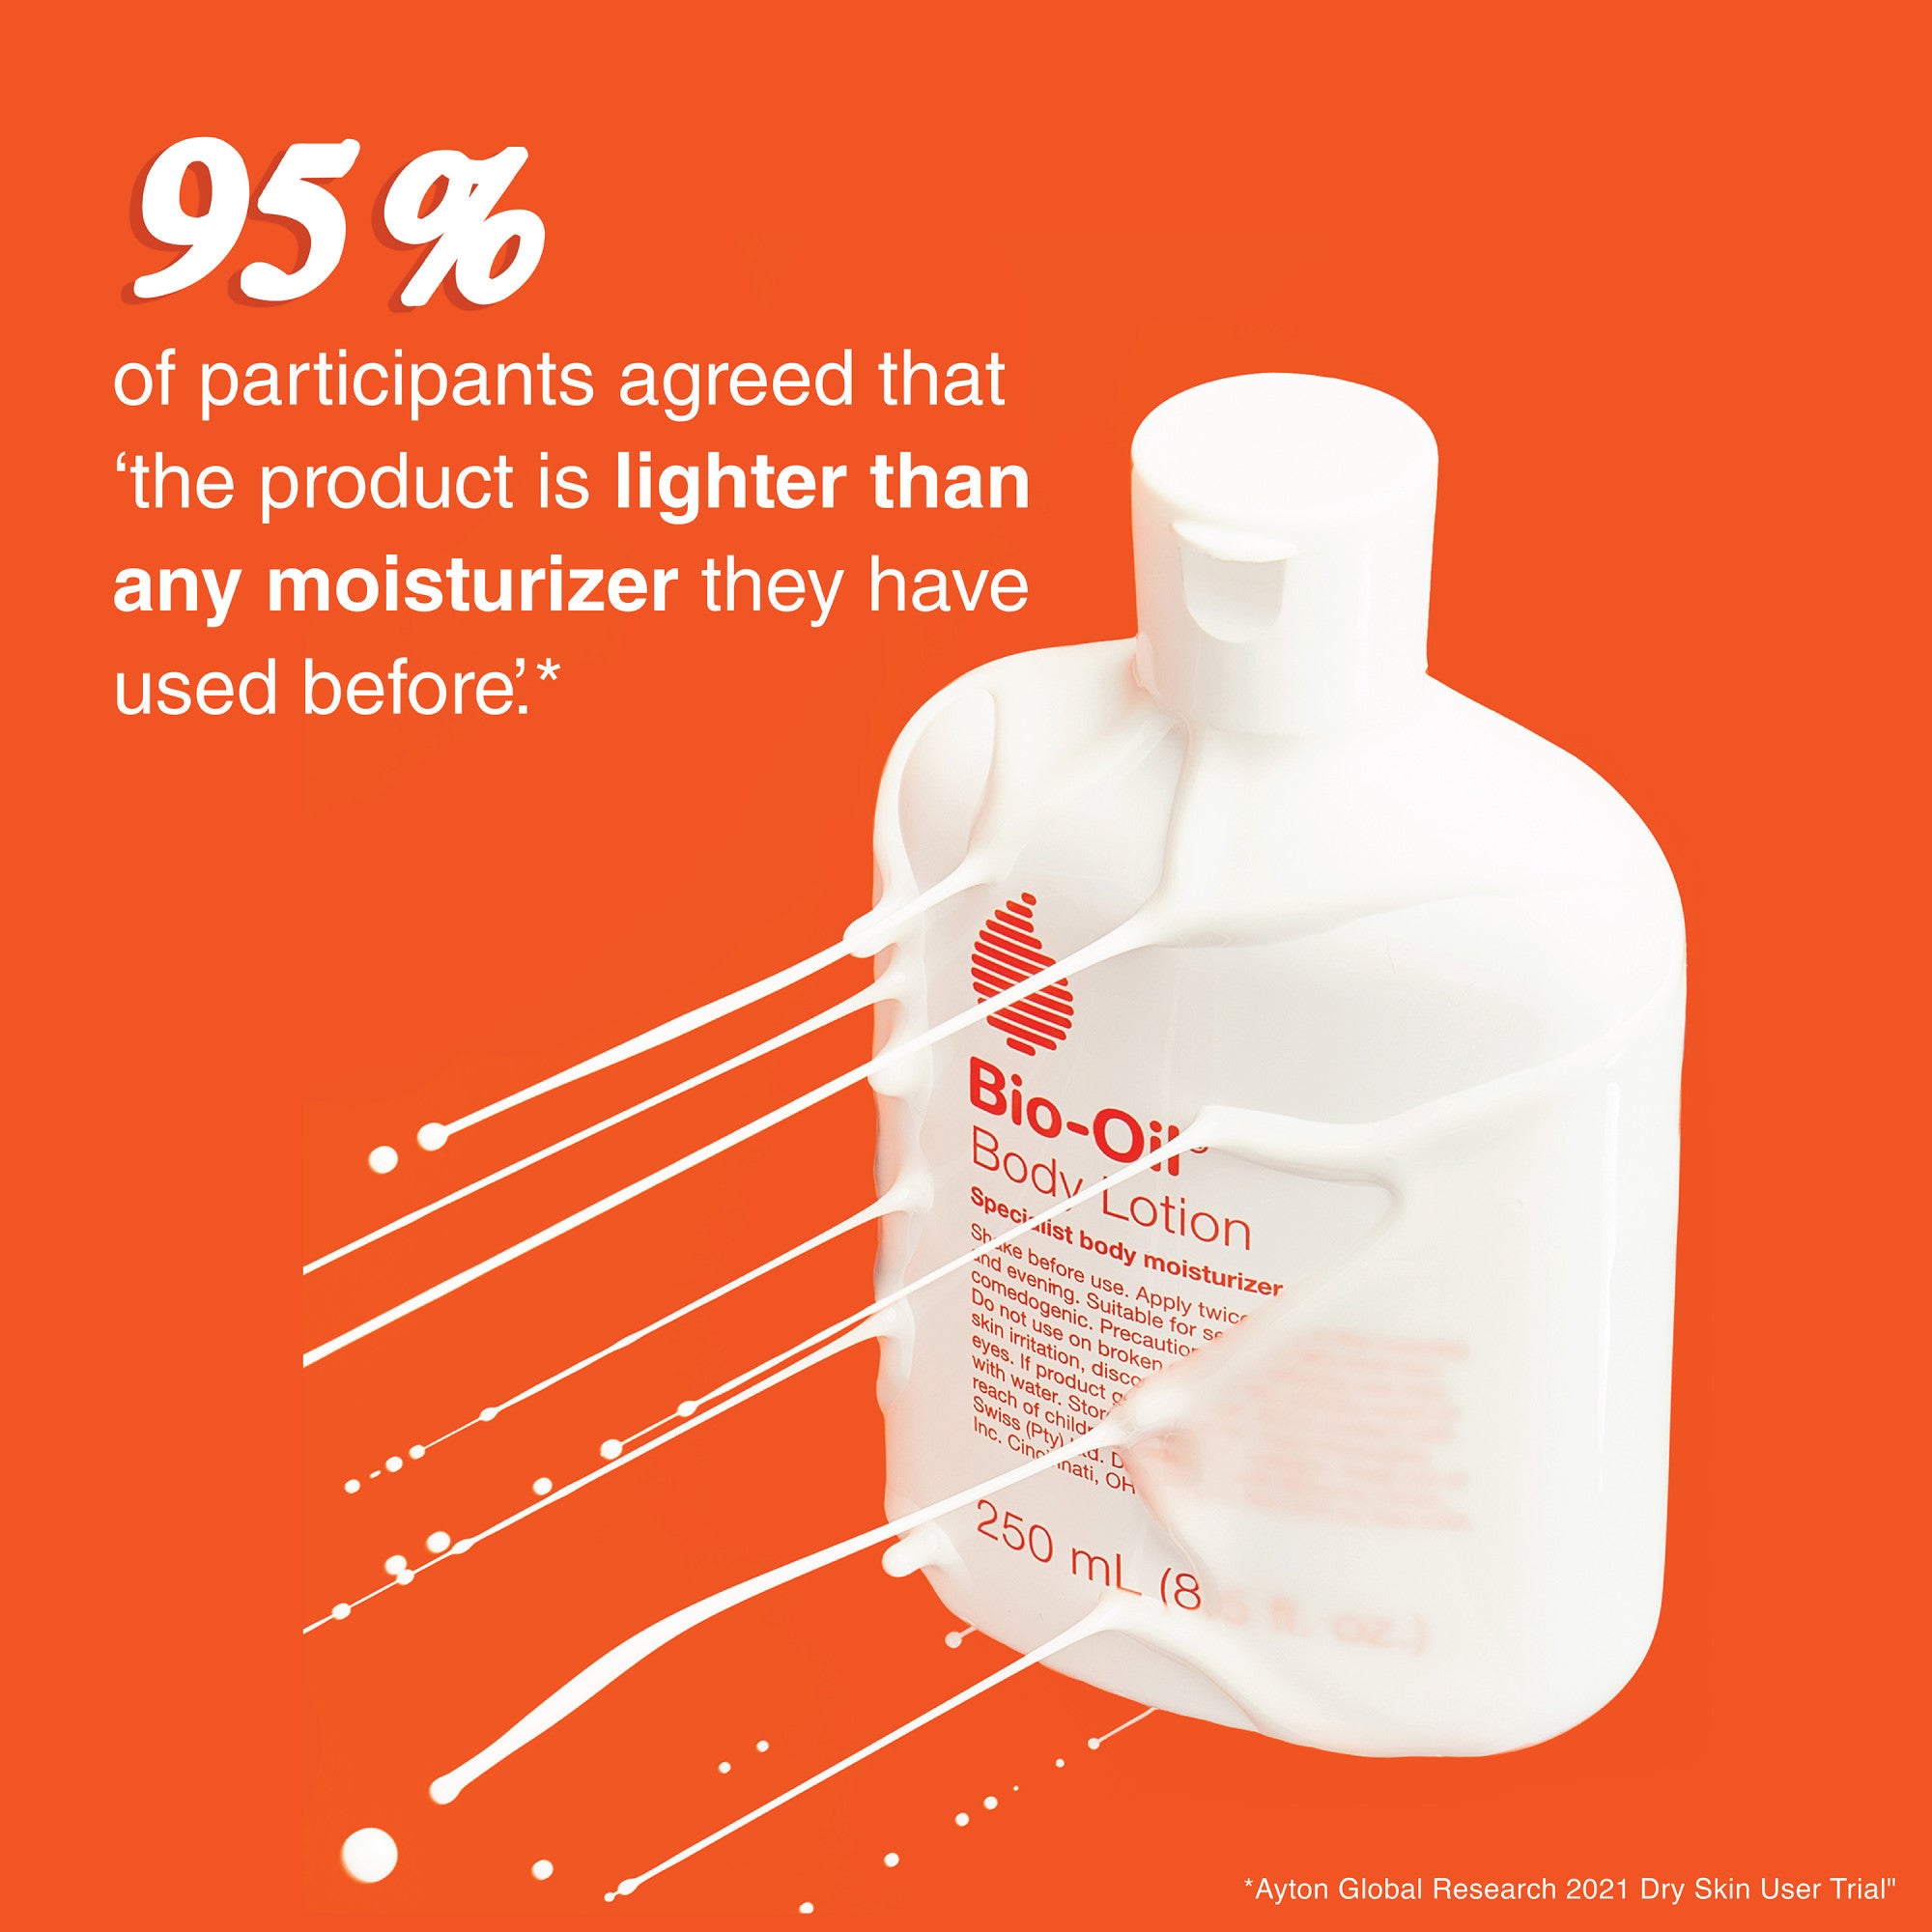 95% of participants agreed that the product is lighter than any moisturizer they have used before.